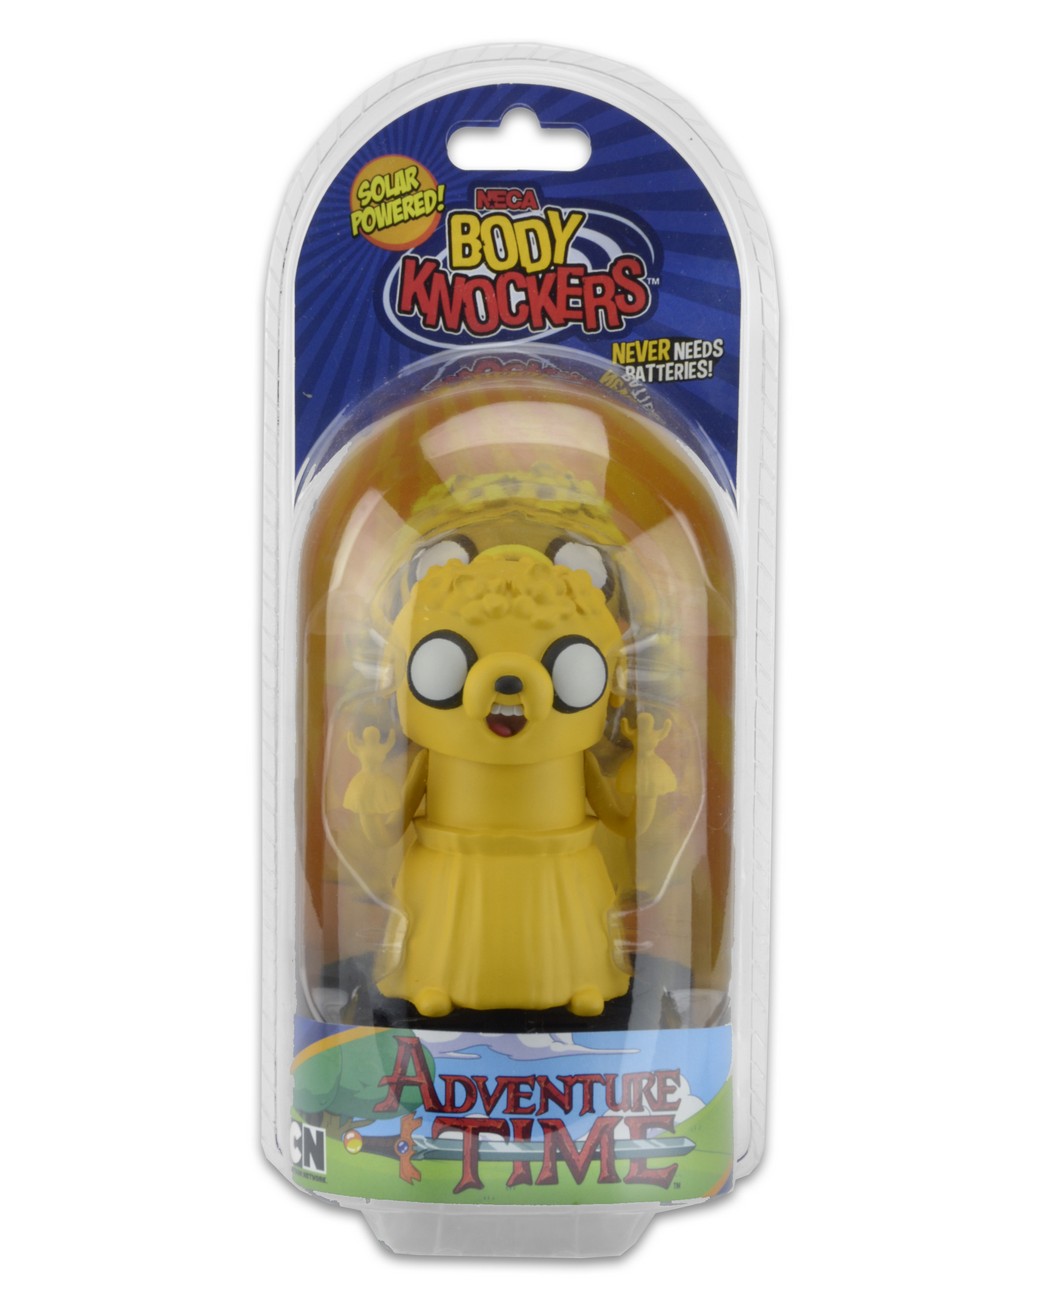 Adventure Time Body Knockers Jake Figure NEW Toys Collectibles NECA Bobble 